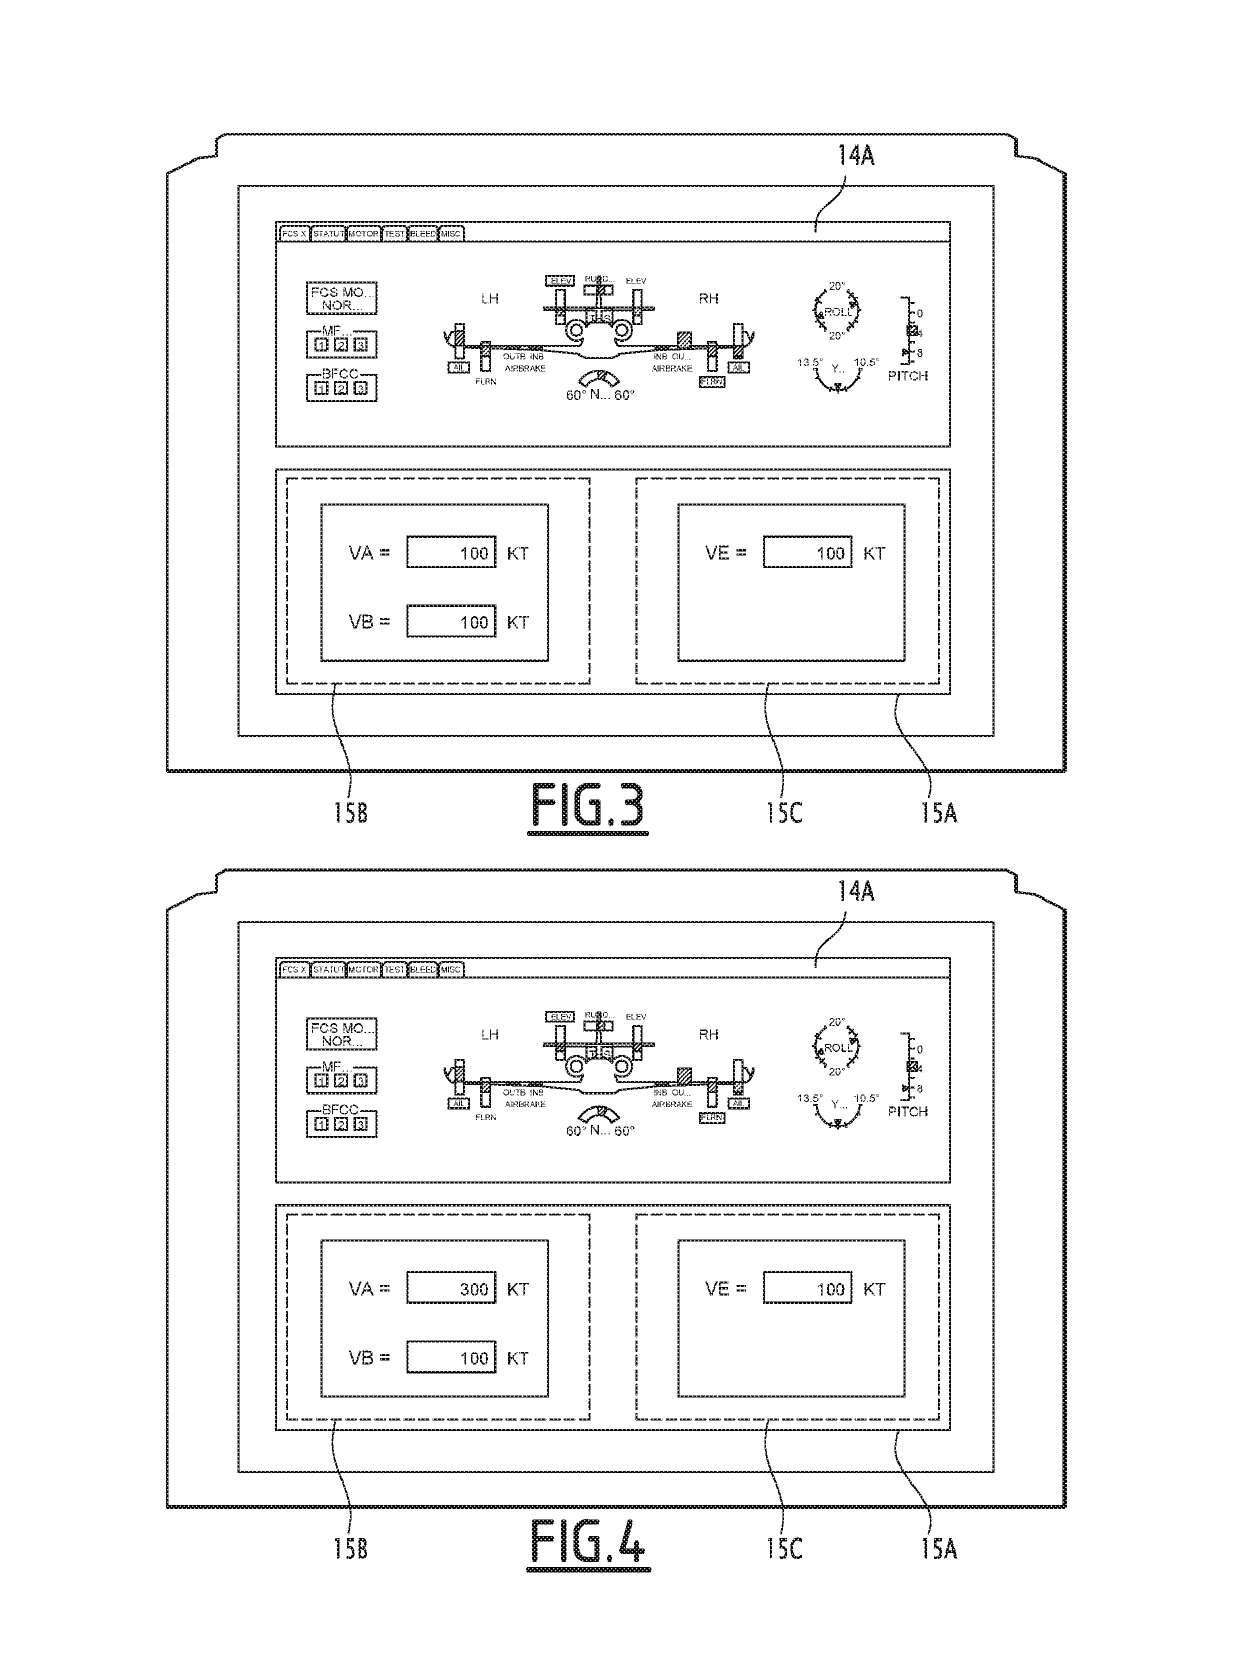 Automatic speech recognition with detection of at least one contextual element, and application management and maintenance of aircraft